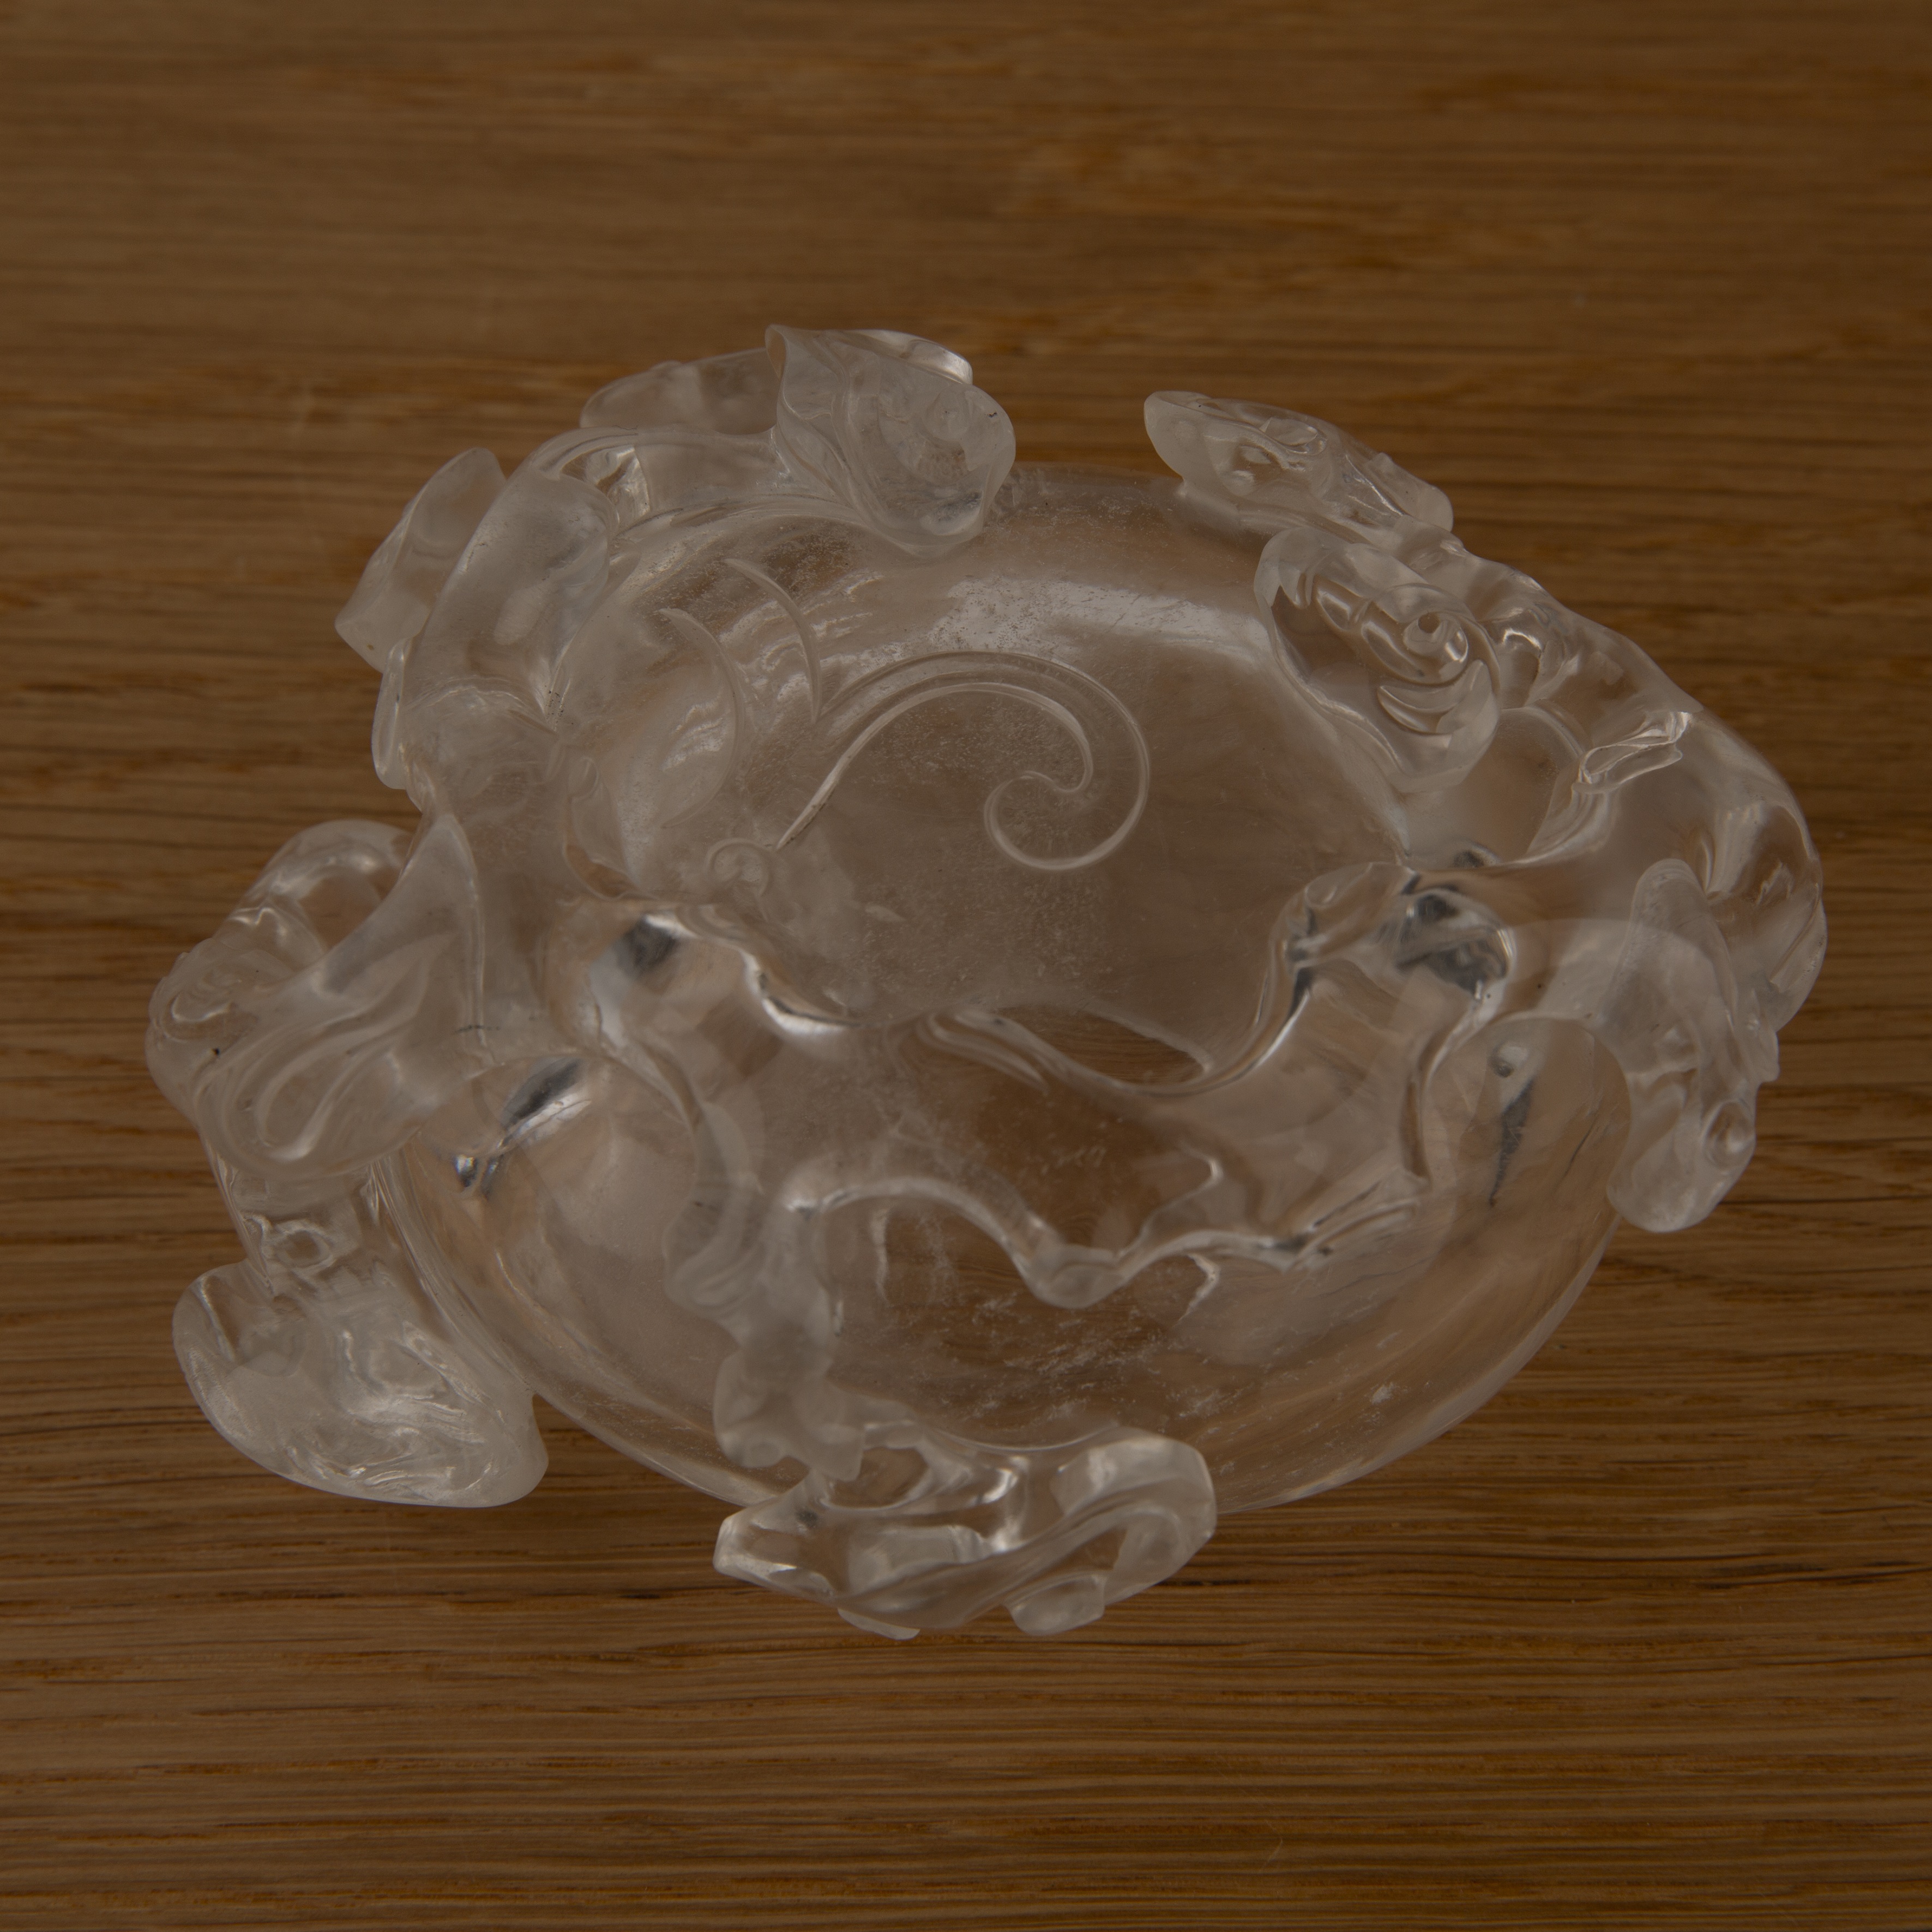 Rock crystal brush washer Chinese, 18th/19th Century of oval form, with trailing lingzhi fungus - Image 5 of 9